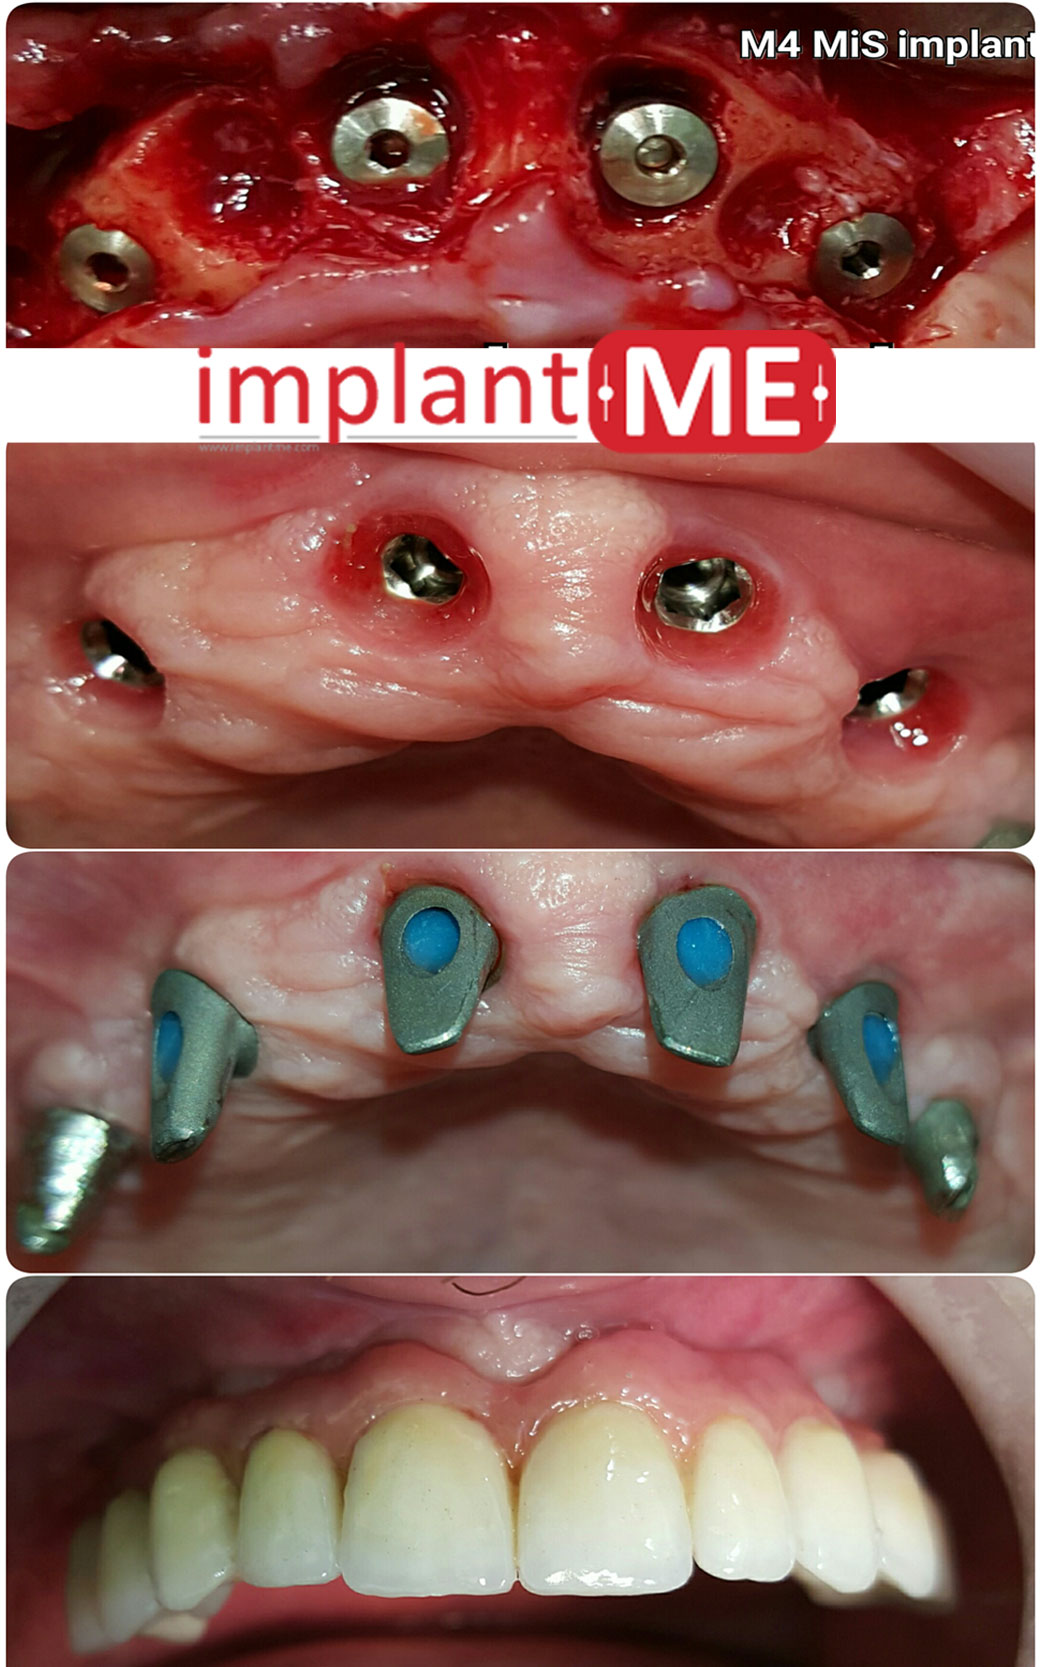 implantME